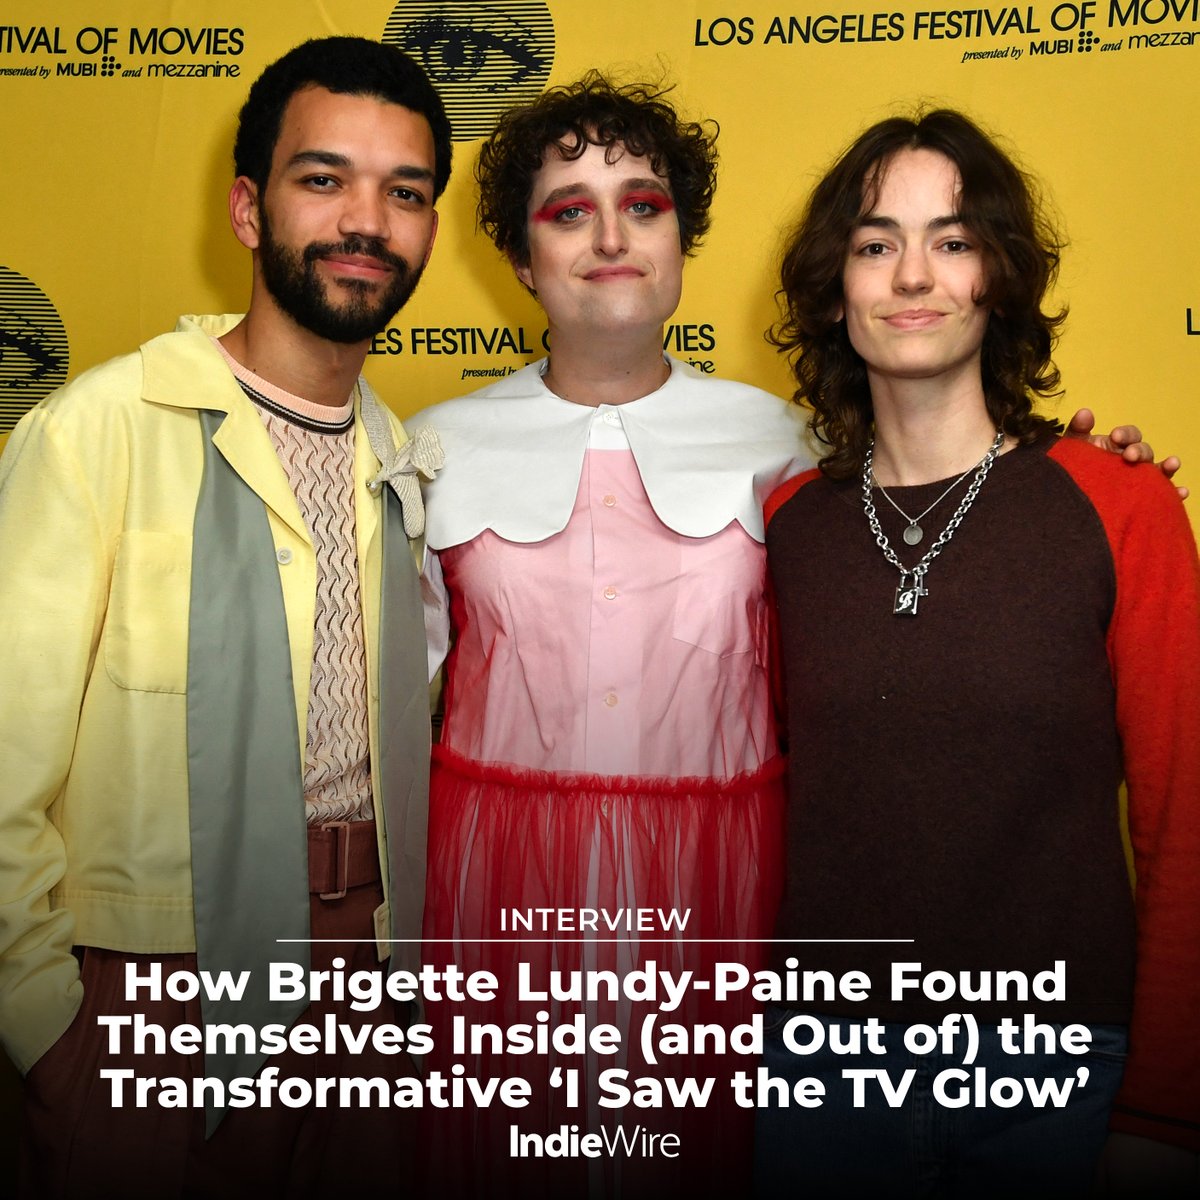 The star of Jane Schoenbrun's revelatory second film, Brigette Lundy-Paine tells IndieWire how simply 'looking for something that was really smart' set them on a path of personal discovery you could only find at the movies: trib.al/jaDNesx